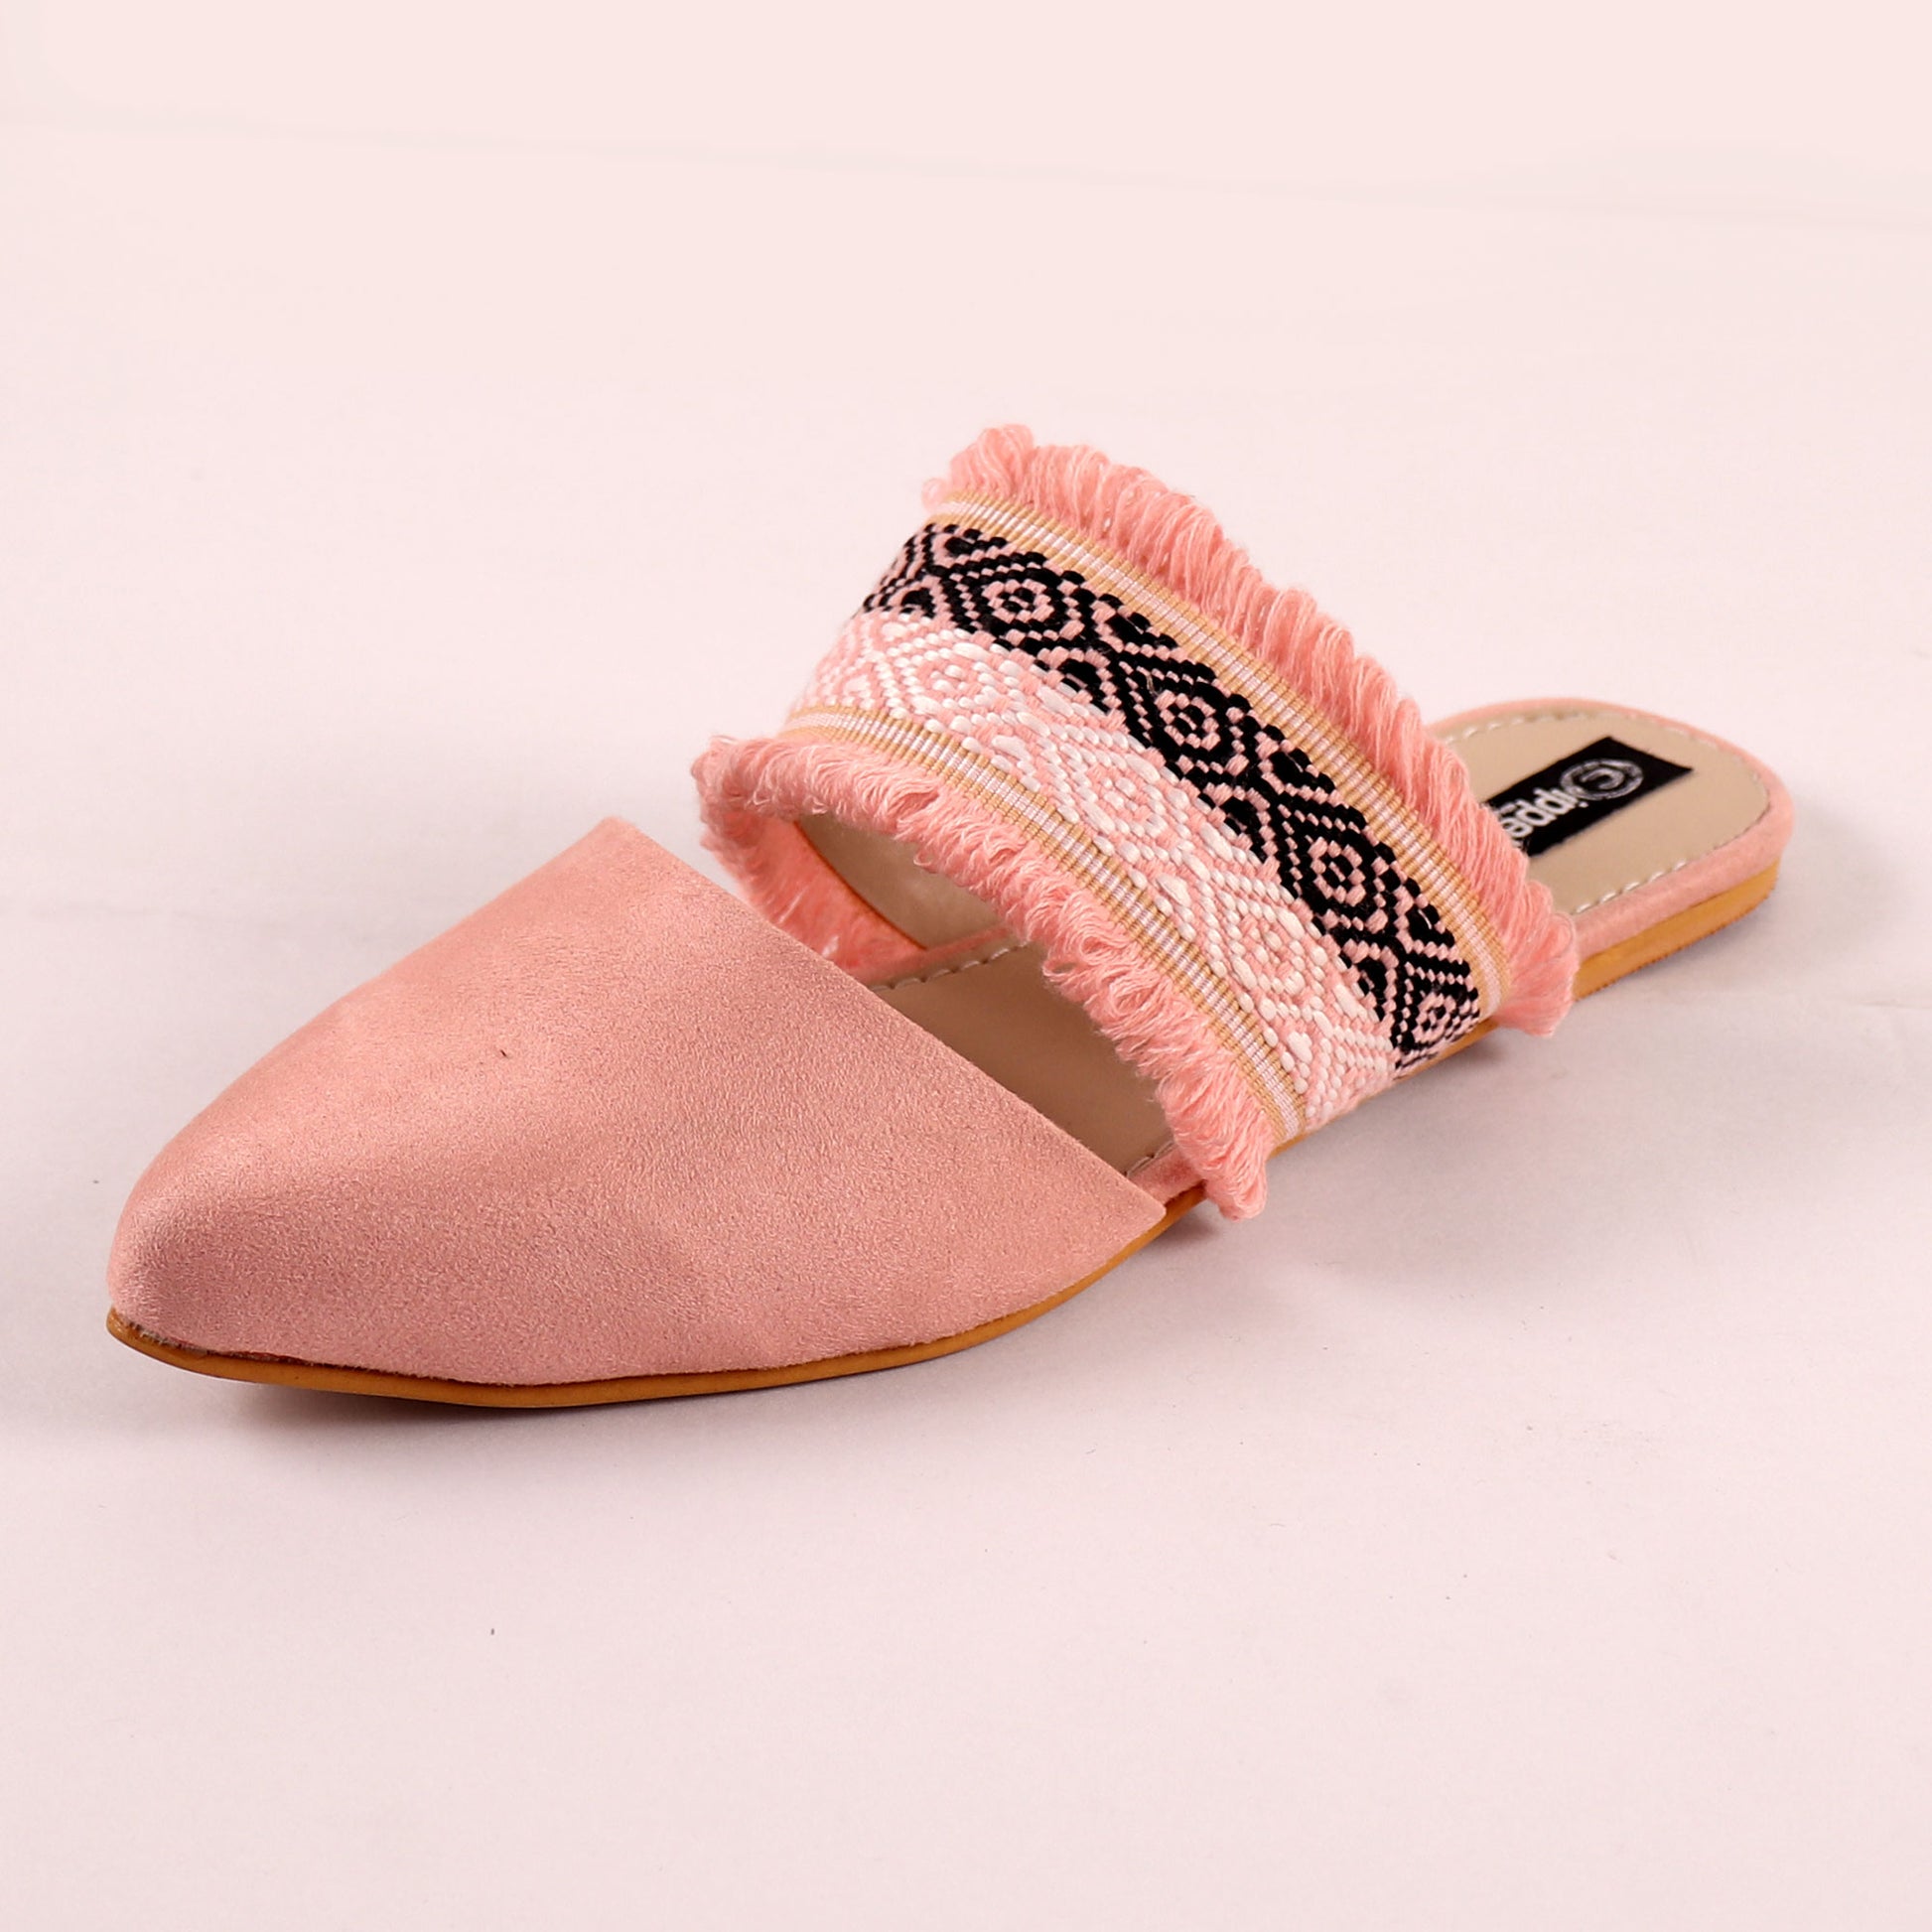 Foot Wear,The Embroided Scarf Mules in Baby Pink - Cippele Multi Store